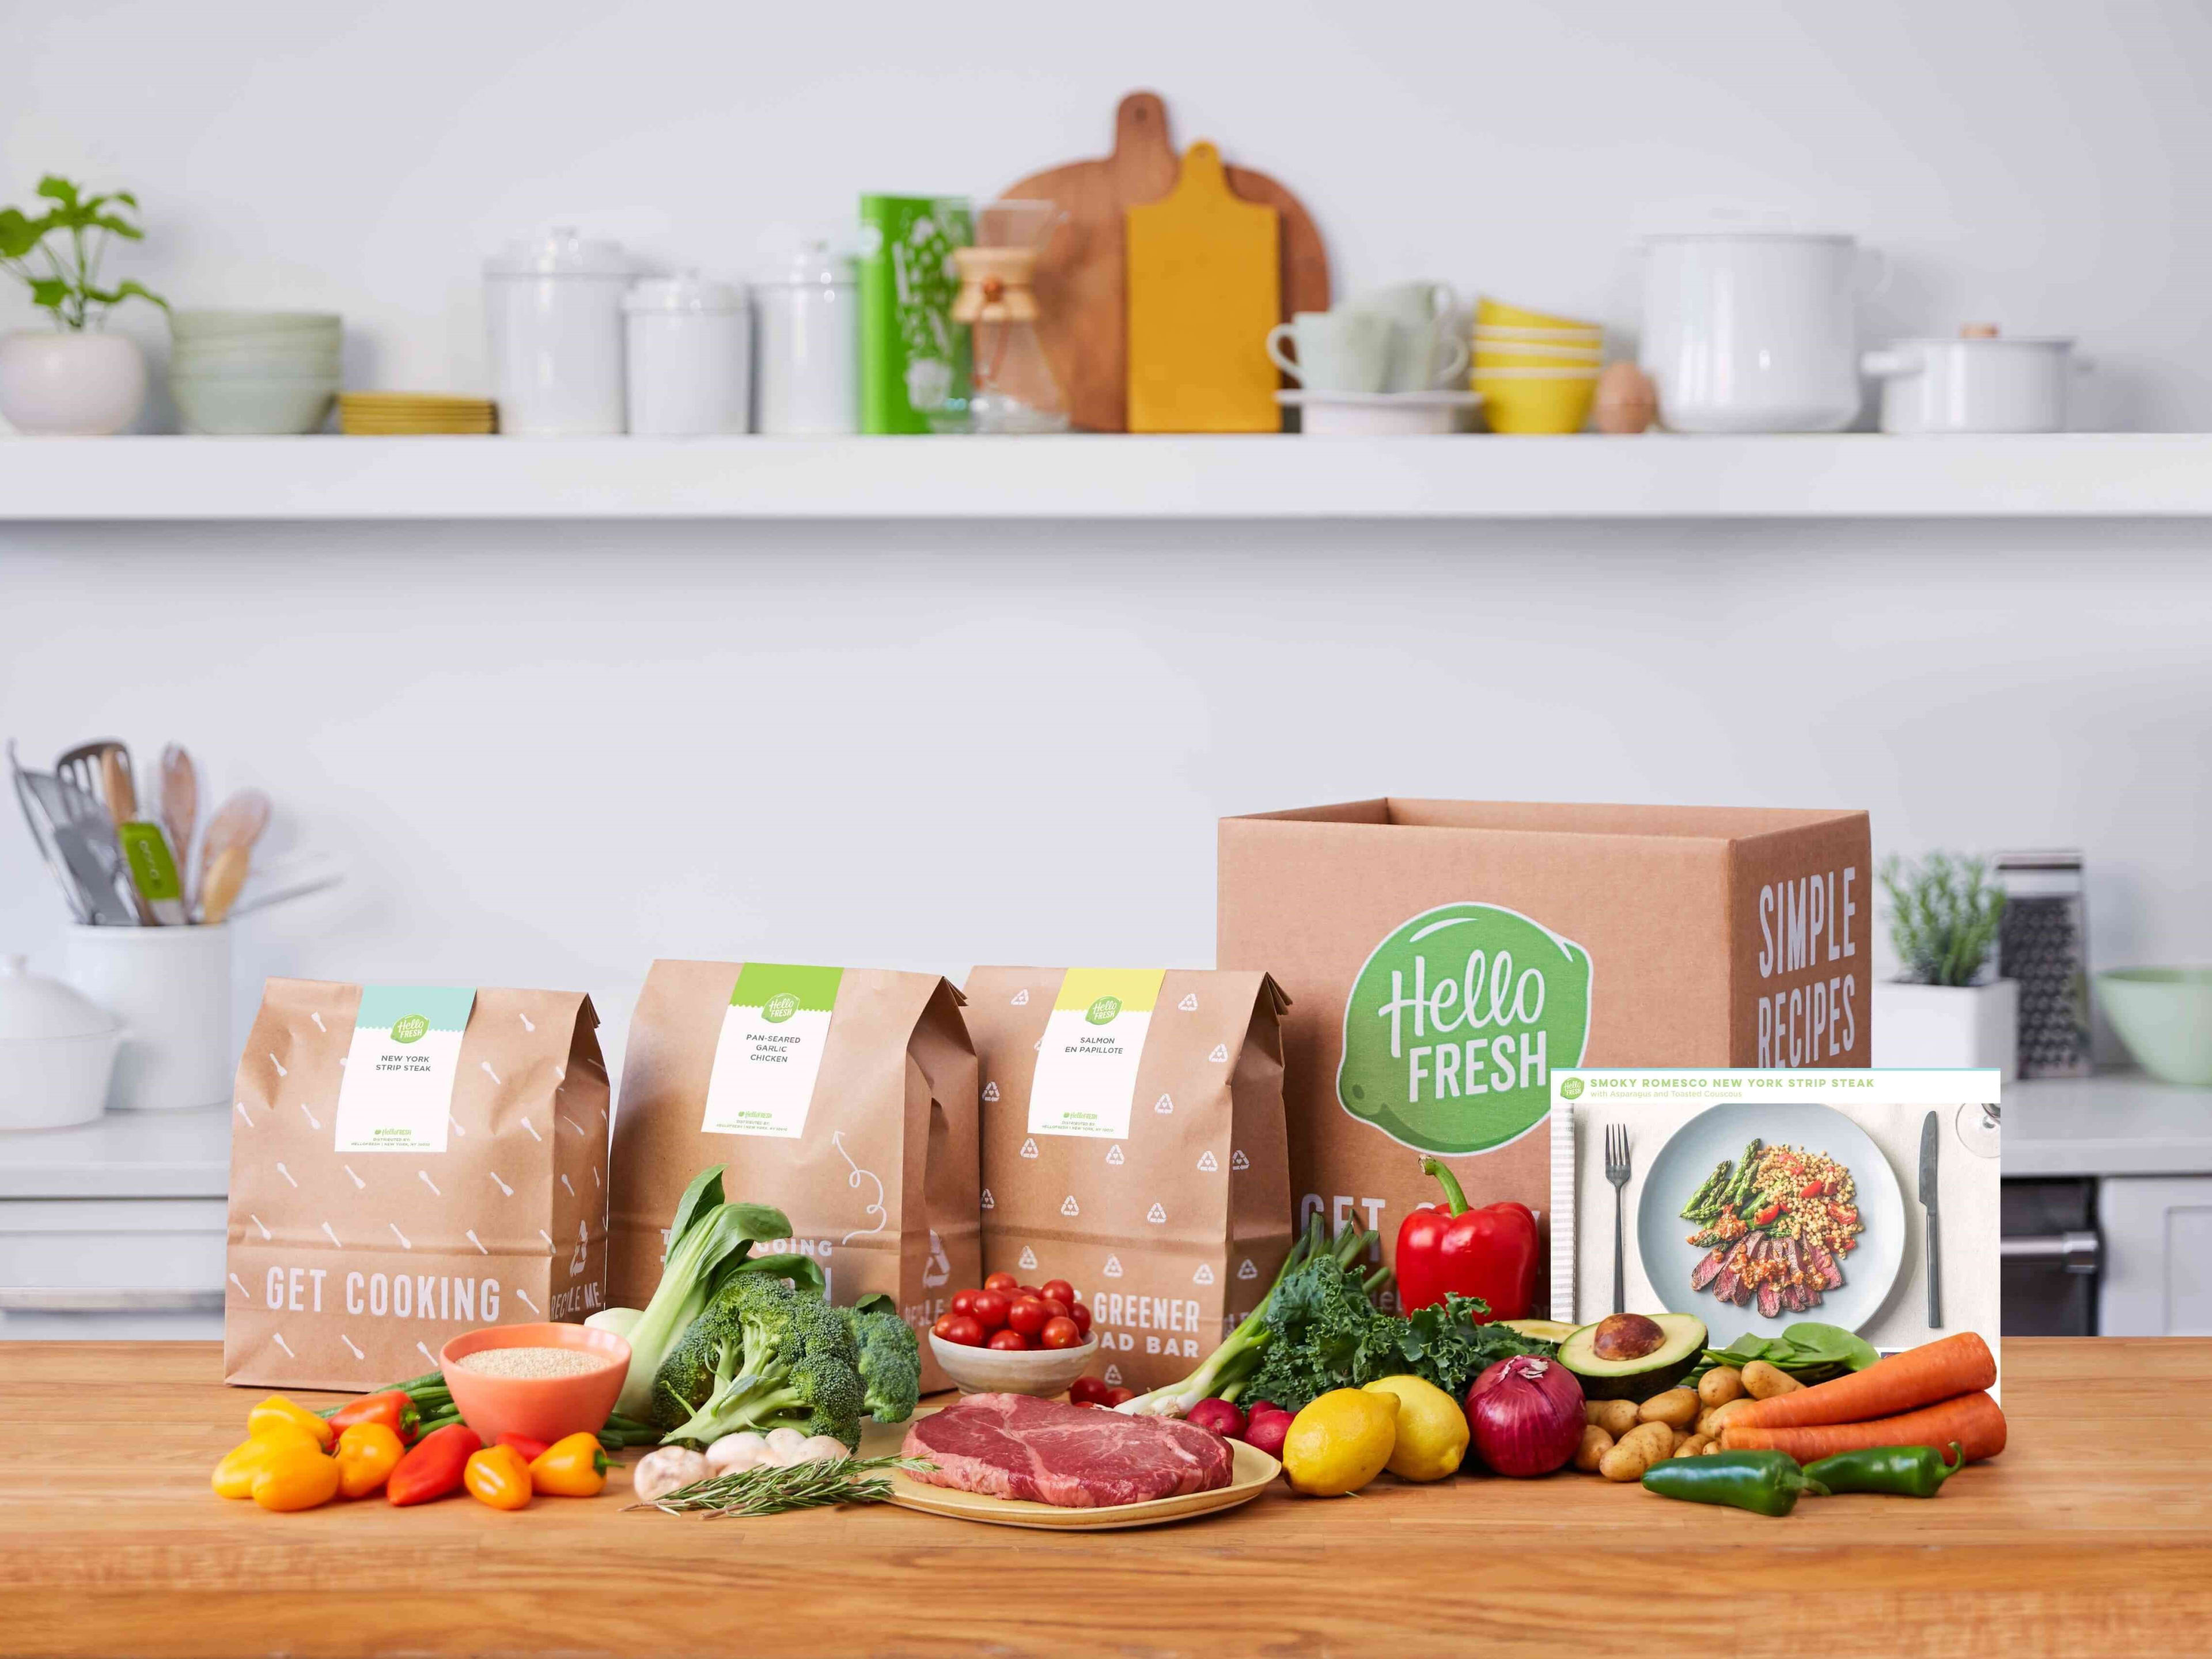 Enjoy tasty meals for one person with America's #1 meal kit